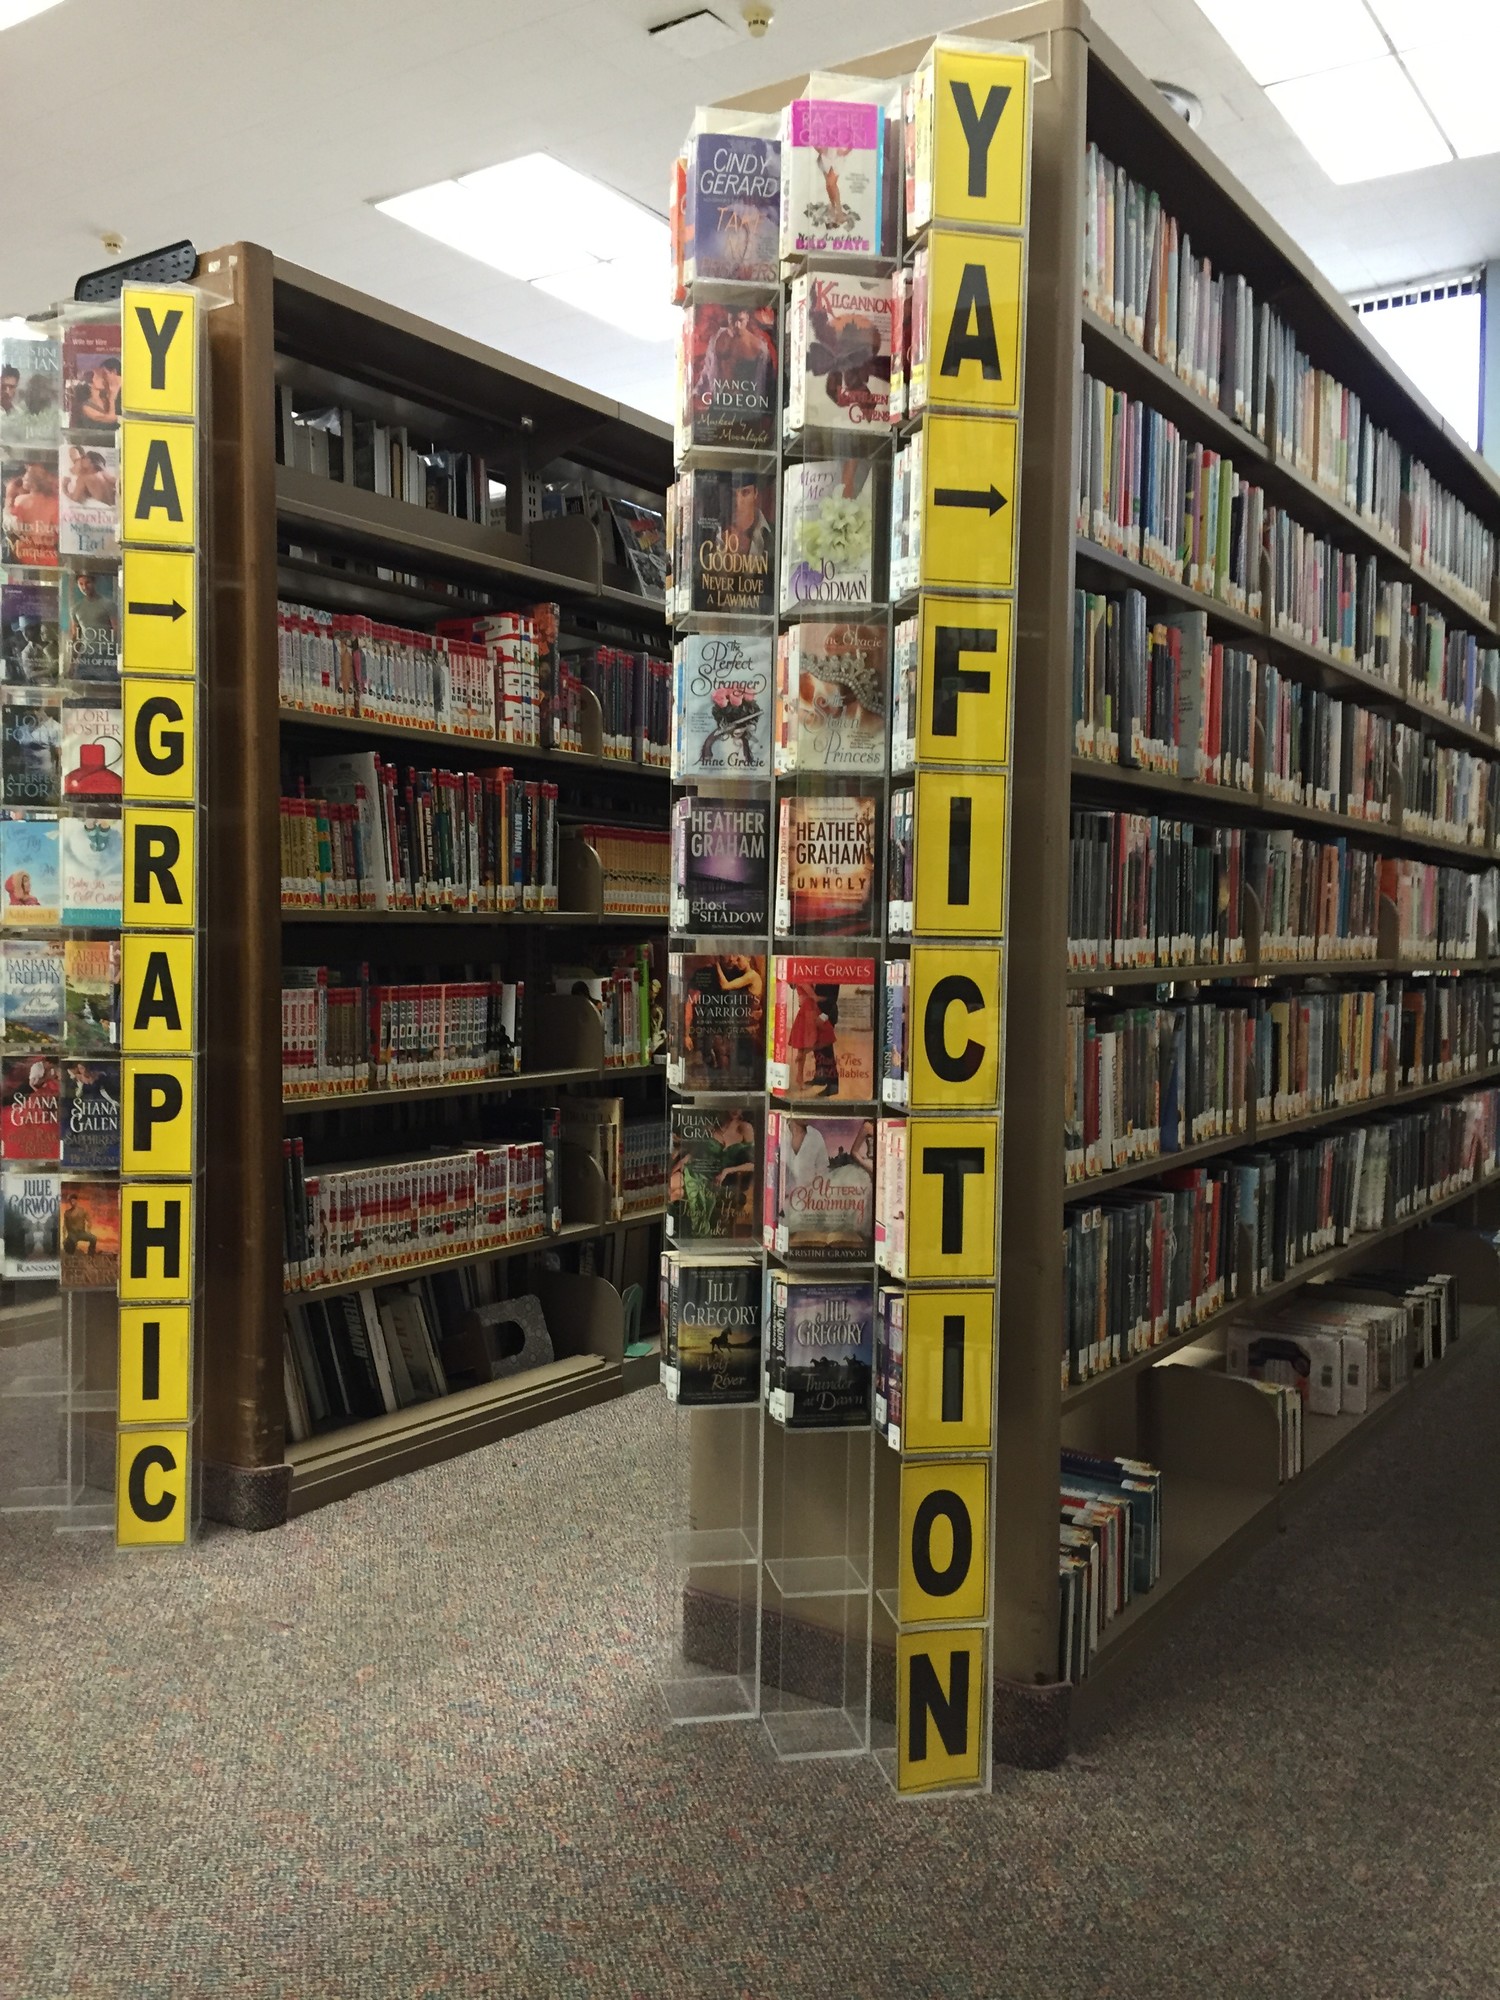 The young adult section would be expanded from two shelves of materials to a room.